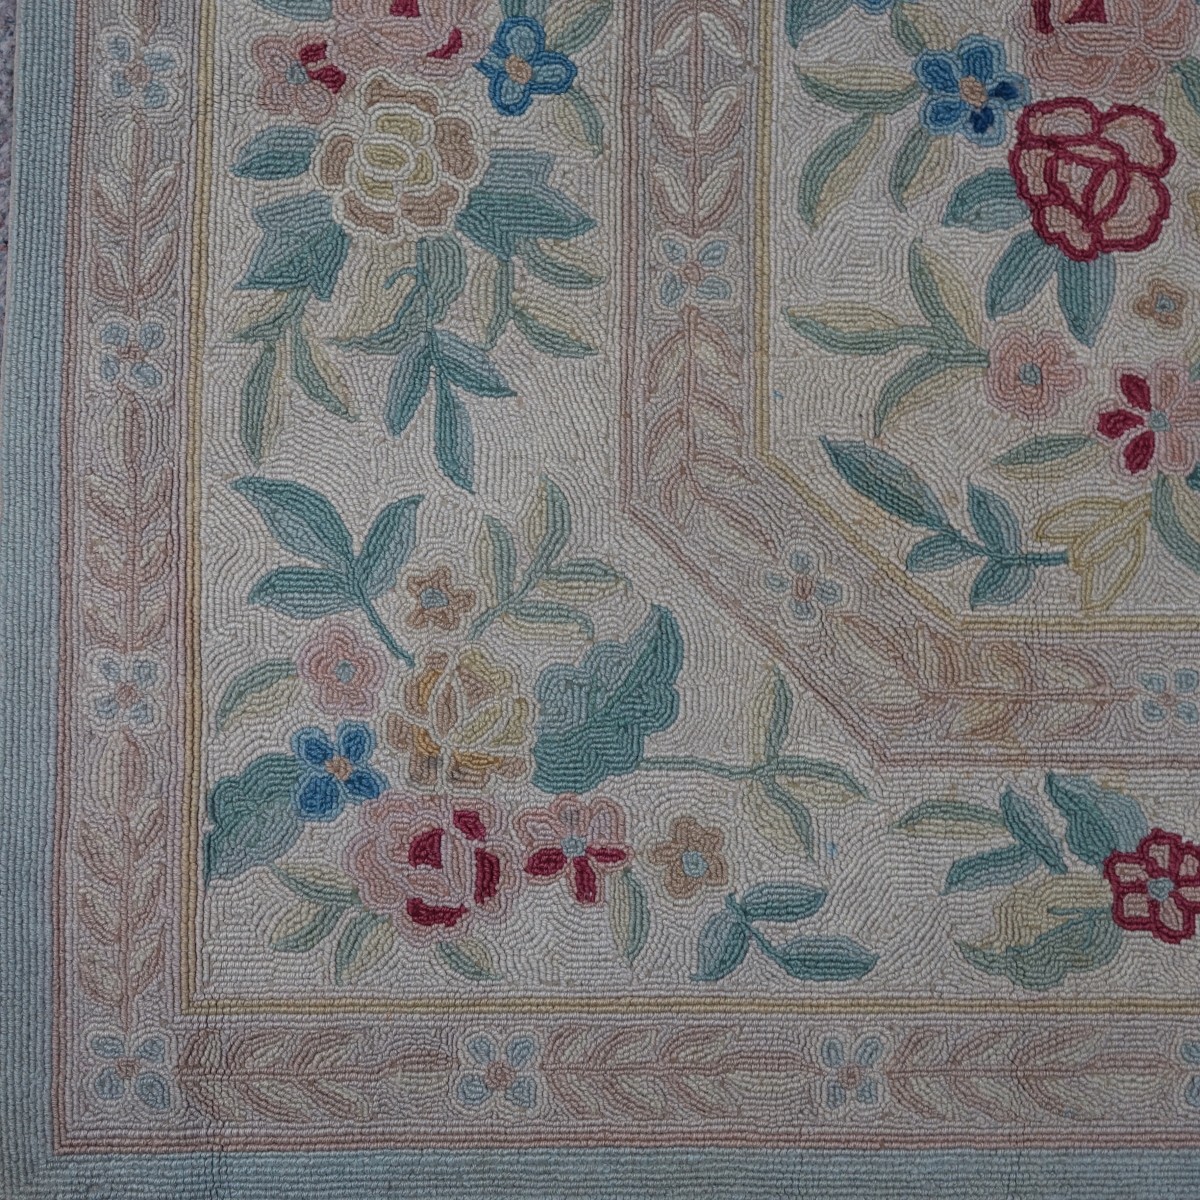 Early 20th C. French Style Hooked Rug